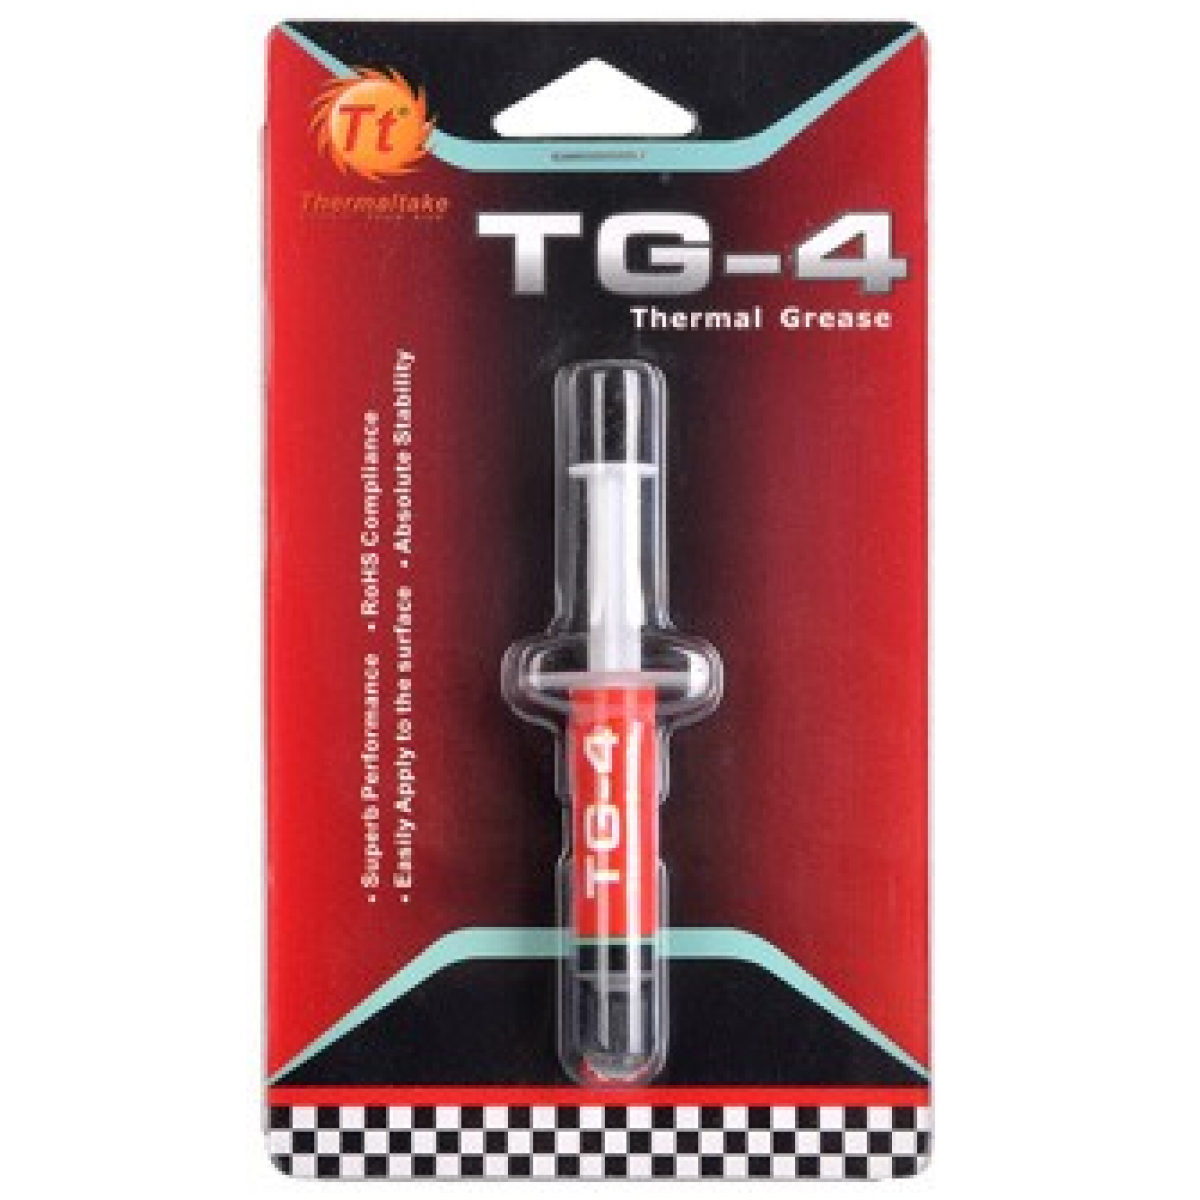 Pasta Térmica Thermaltake Thermal Grease, TG4 CL-O001-GROSGM-A